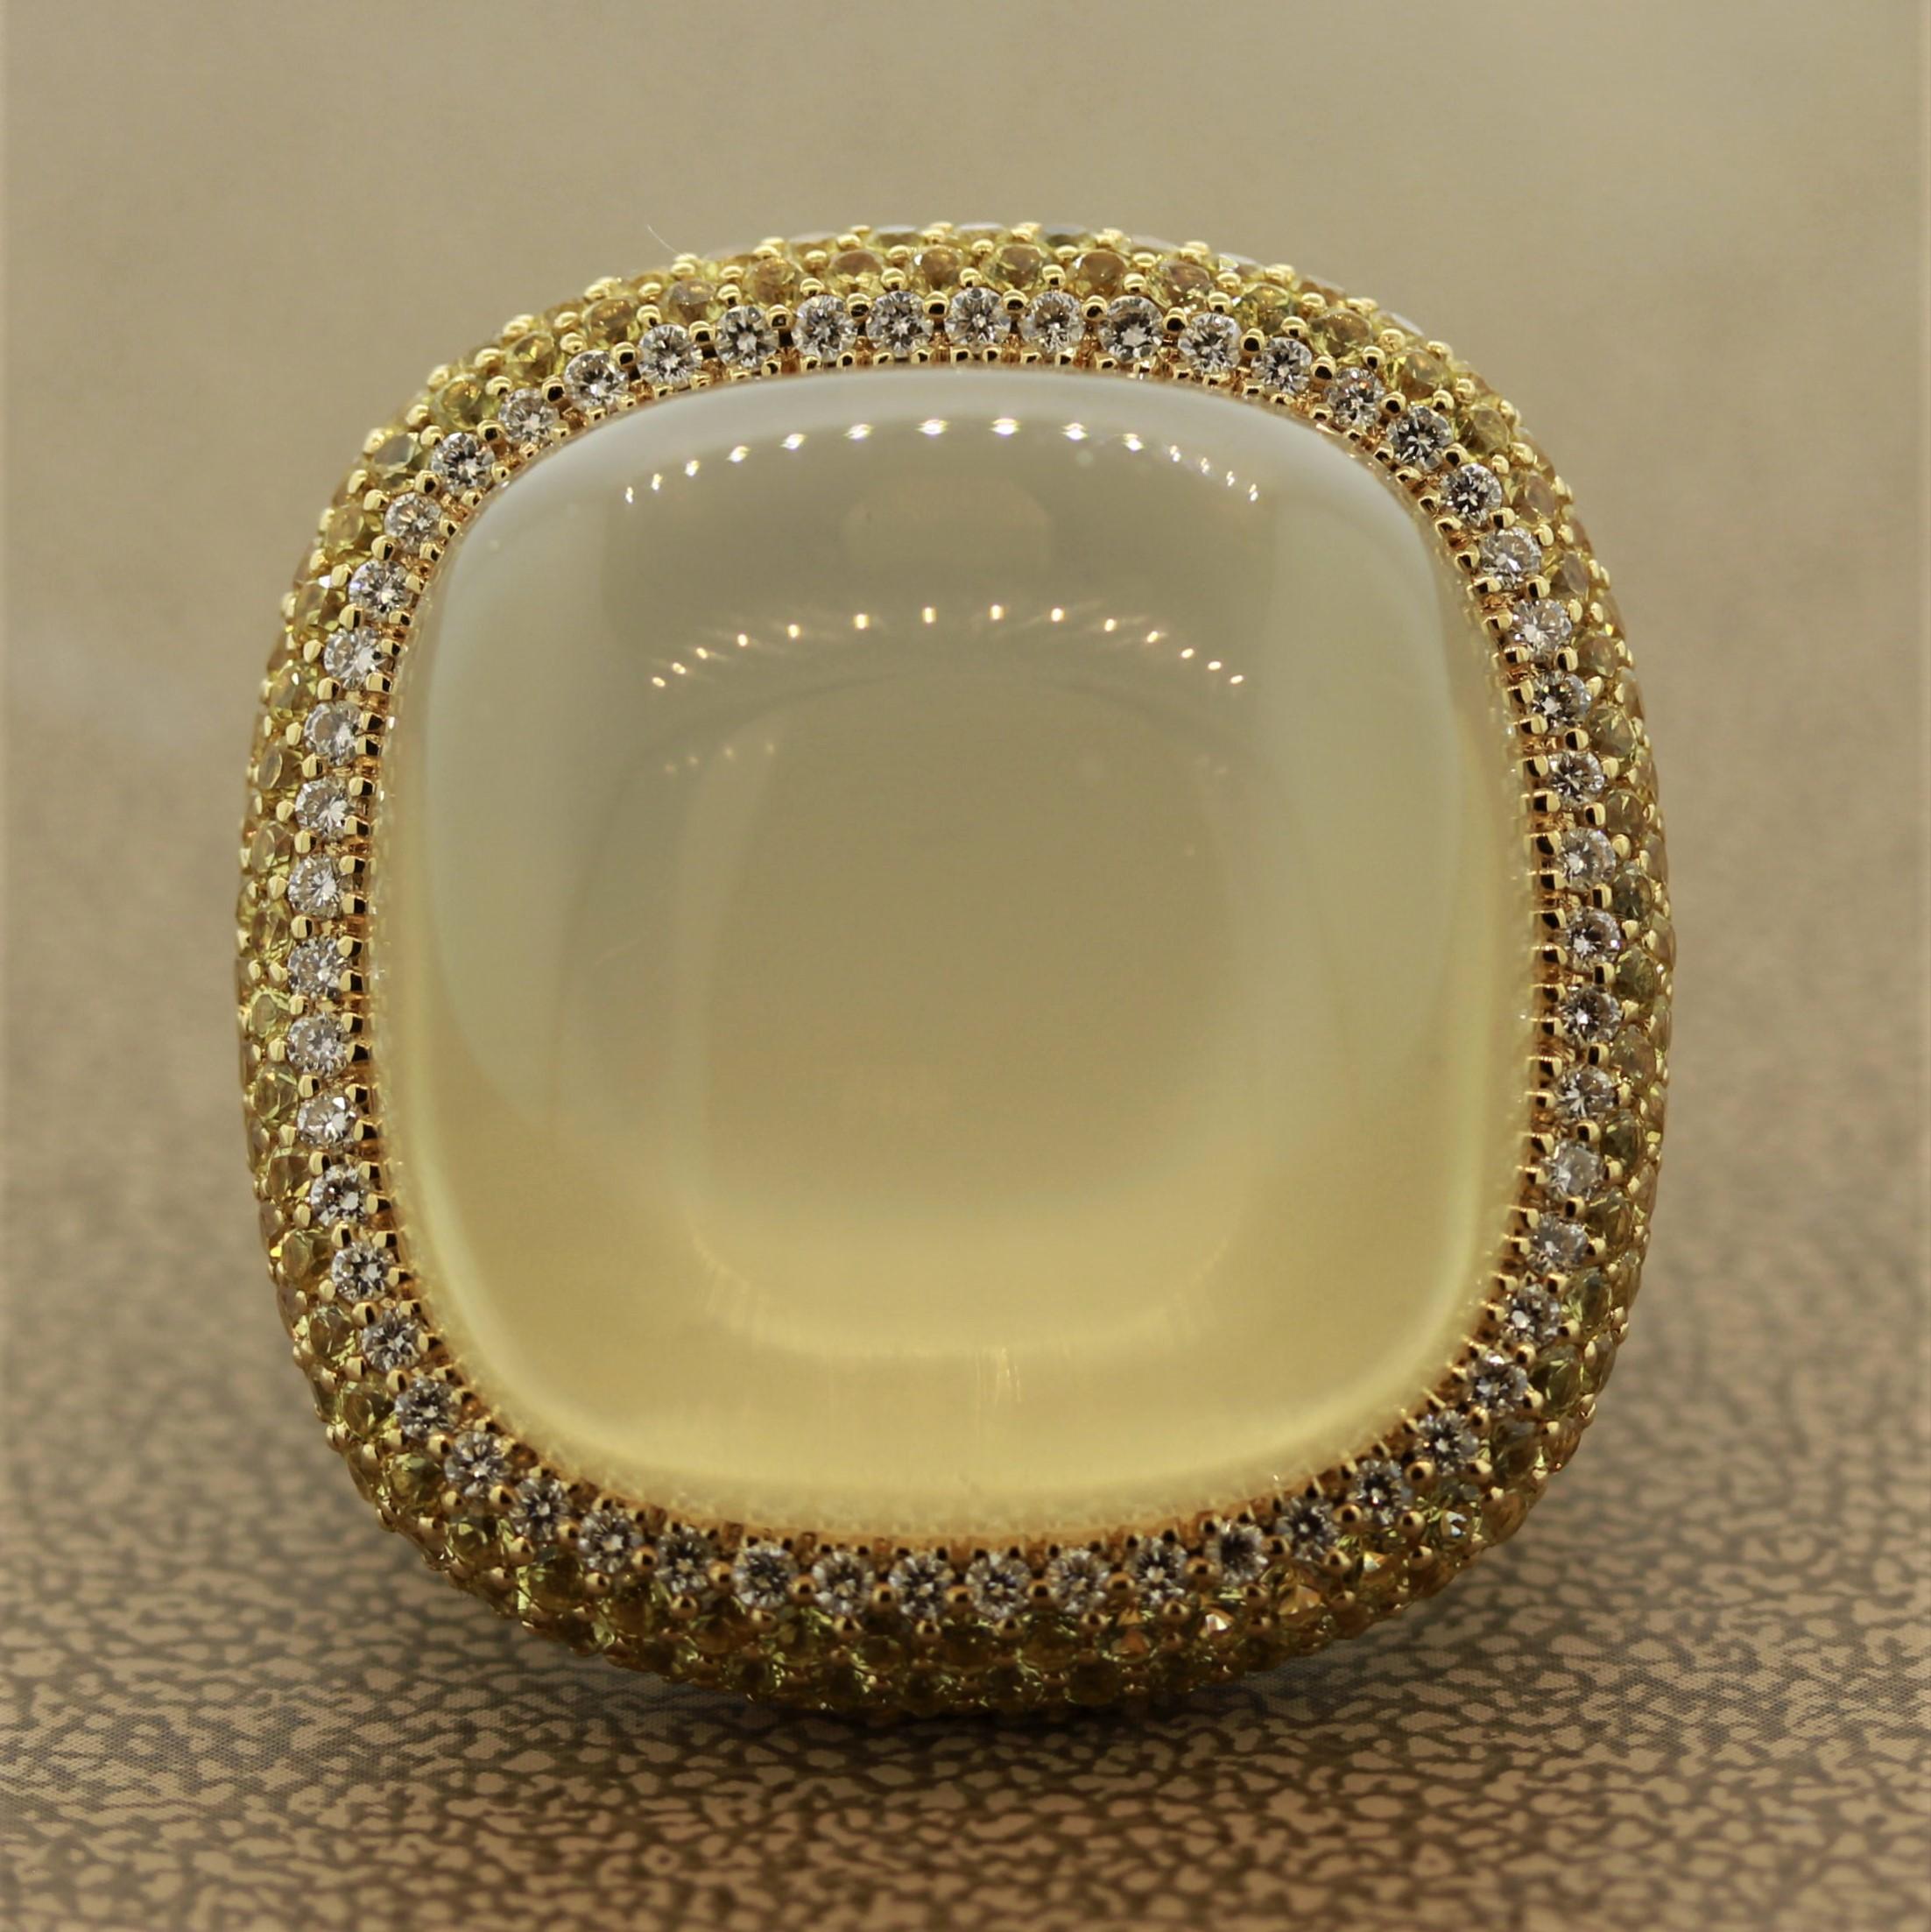 A bold cocktail ring featuring a large gem quality moonstone weighing 58.80 carats. The stone shows excellent adularescence which is light rolling over the surface of the gem, a special natural phenomenon of fine moonstones. It is accented by 6.48